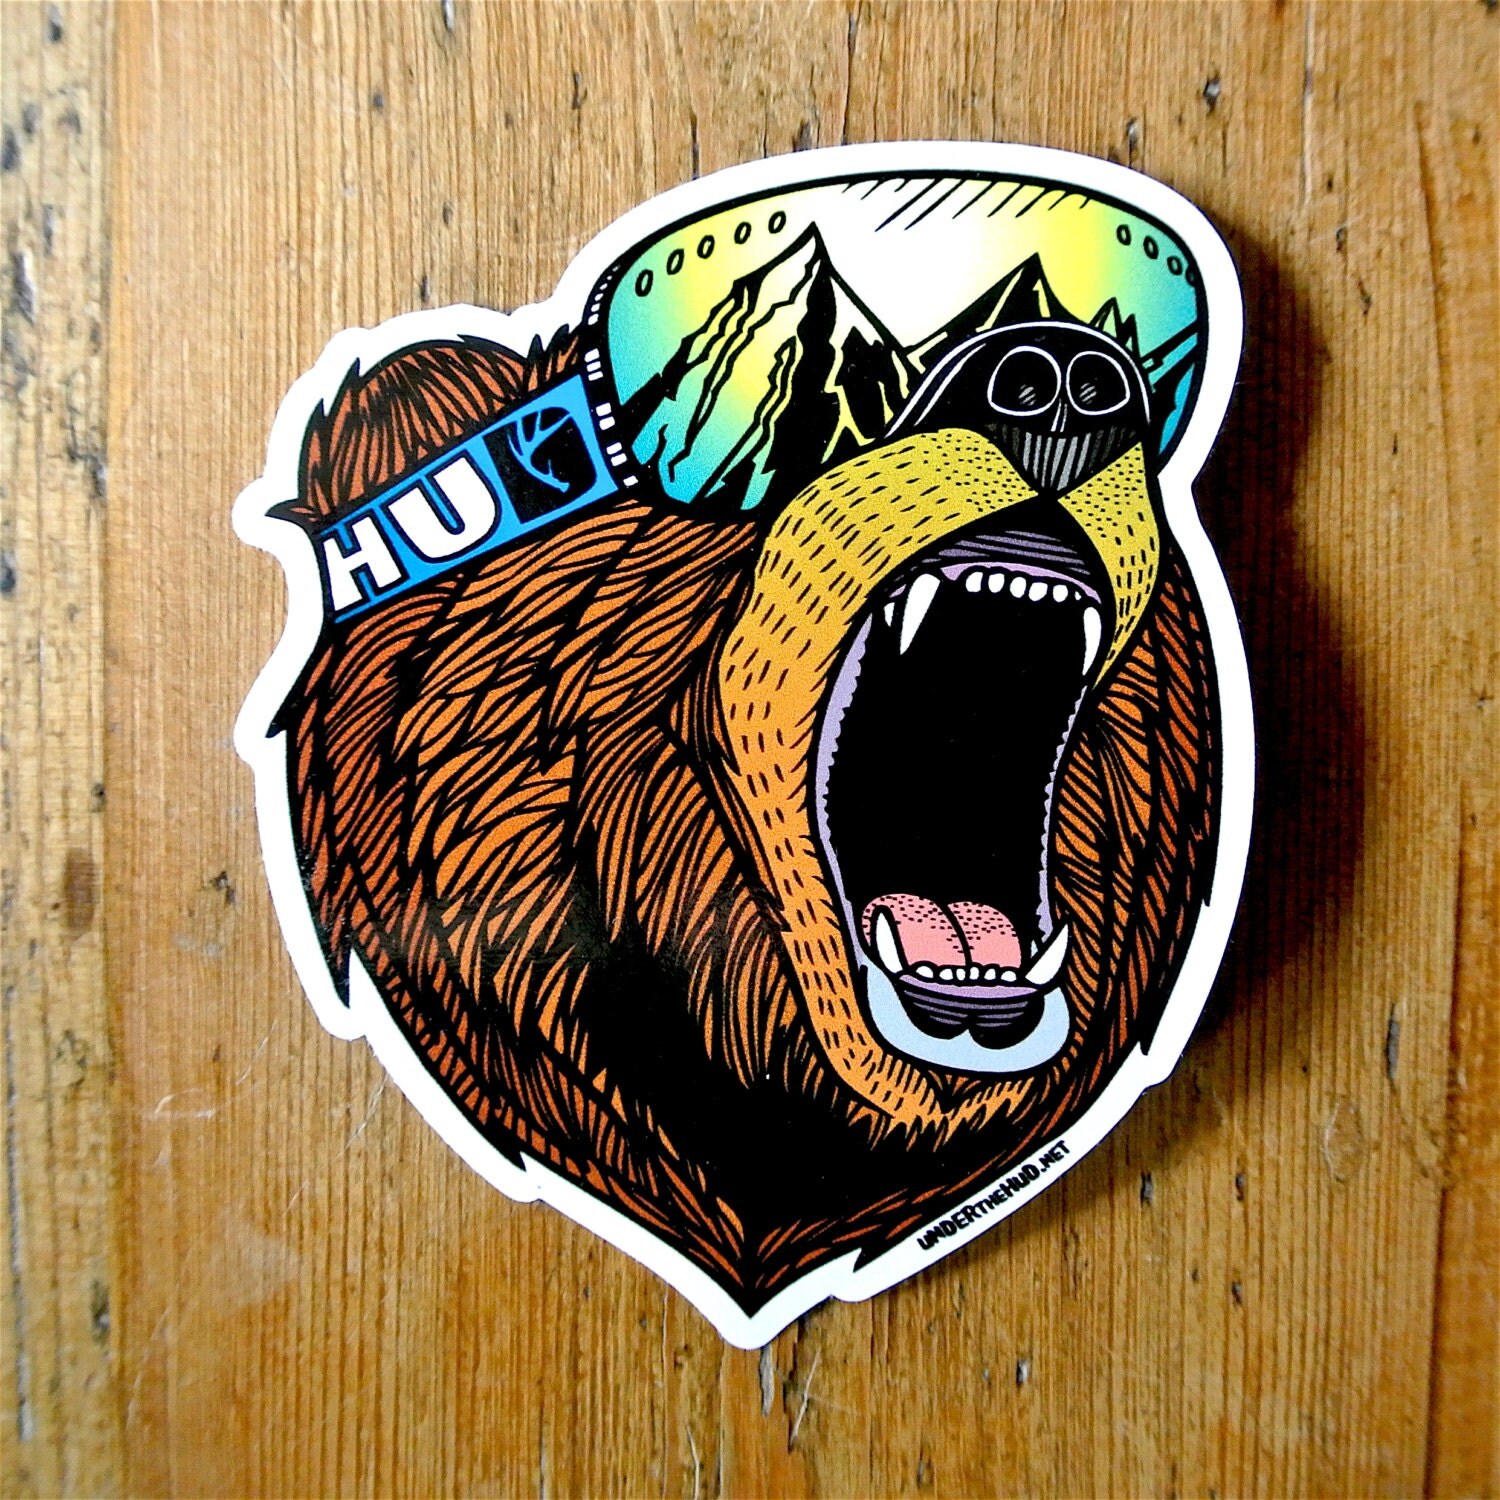 Bear Surfboards Decals Patches Stickers Accessories International